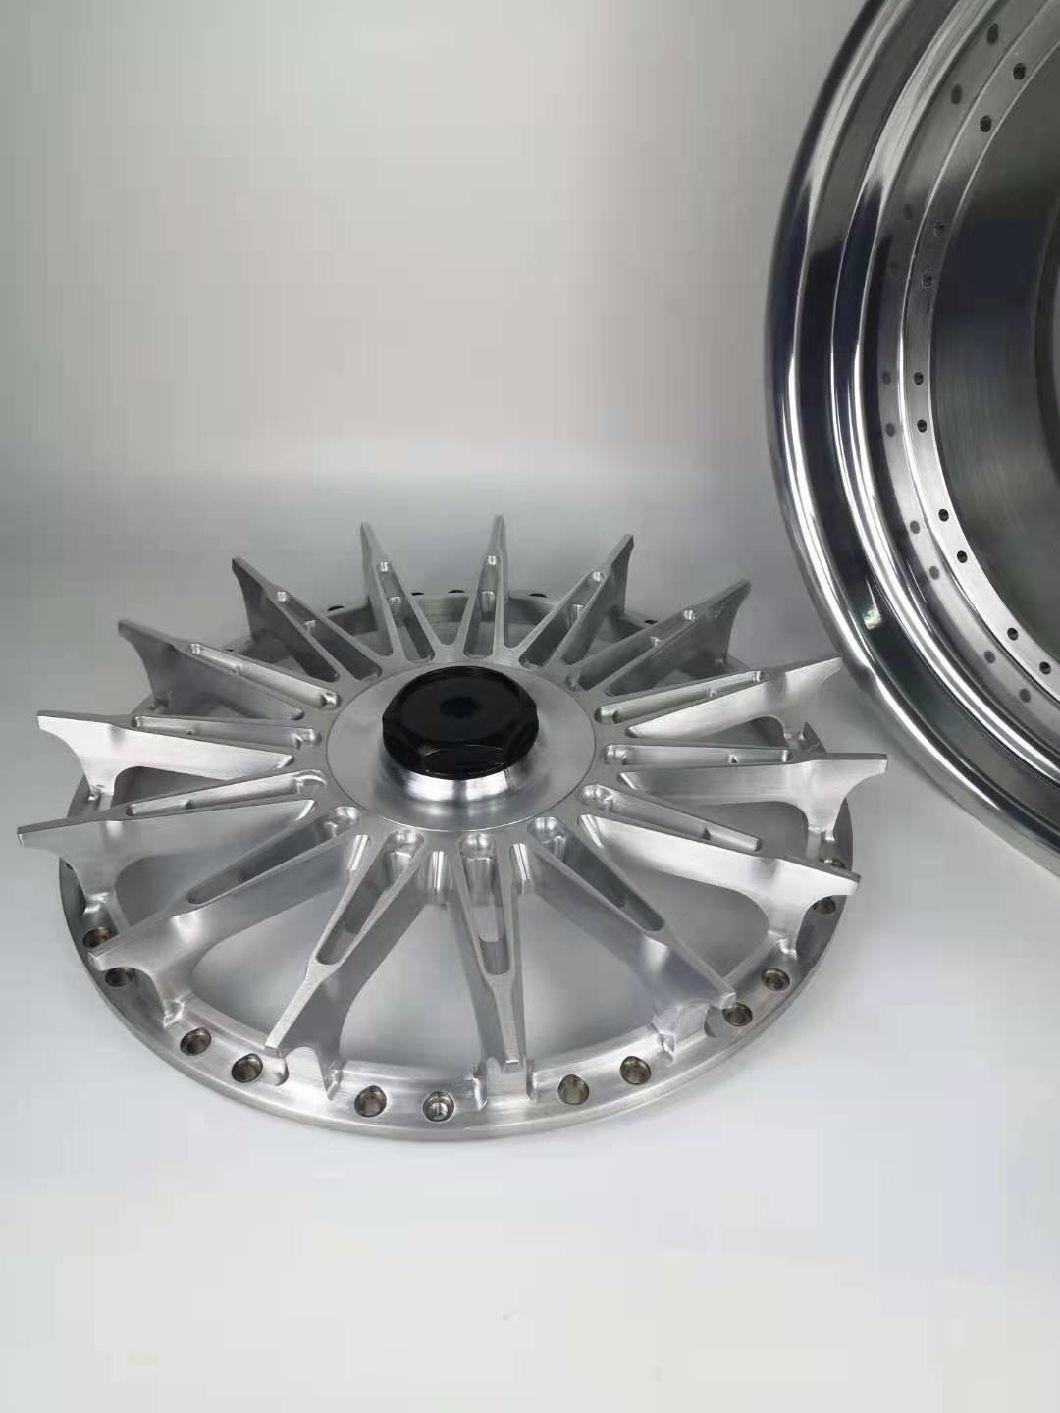 T6061-T6 Forged High Quality Racing Car Alloy Wheels